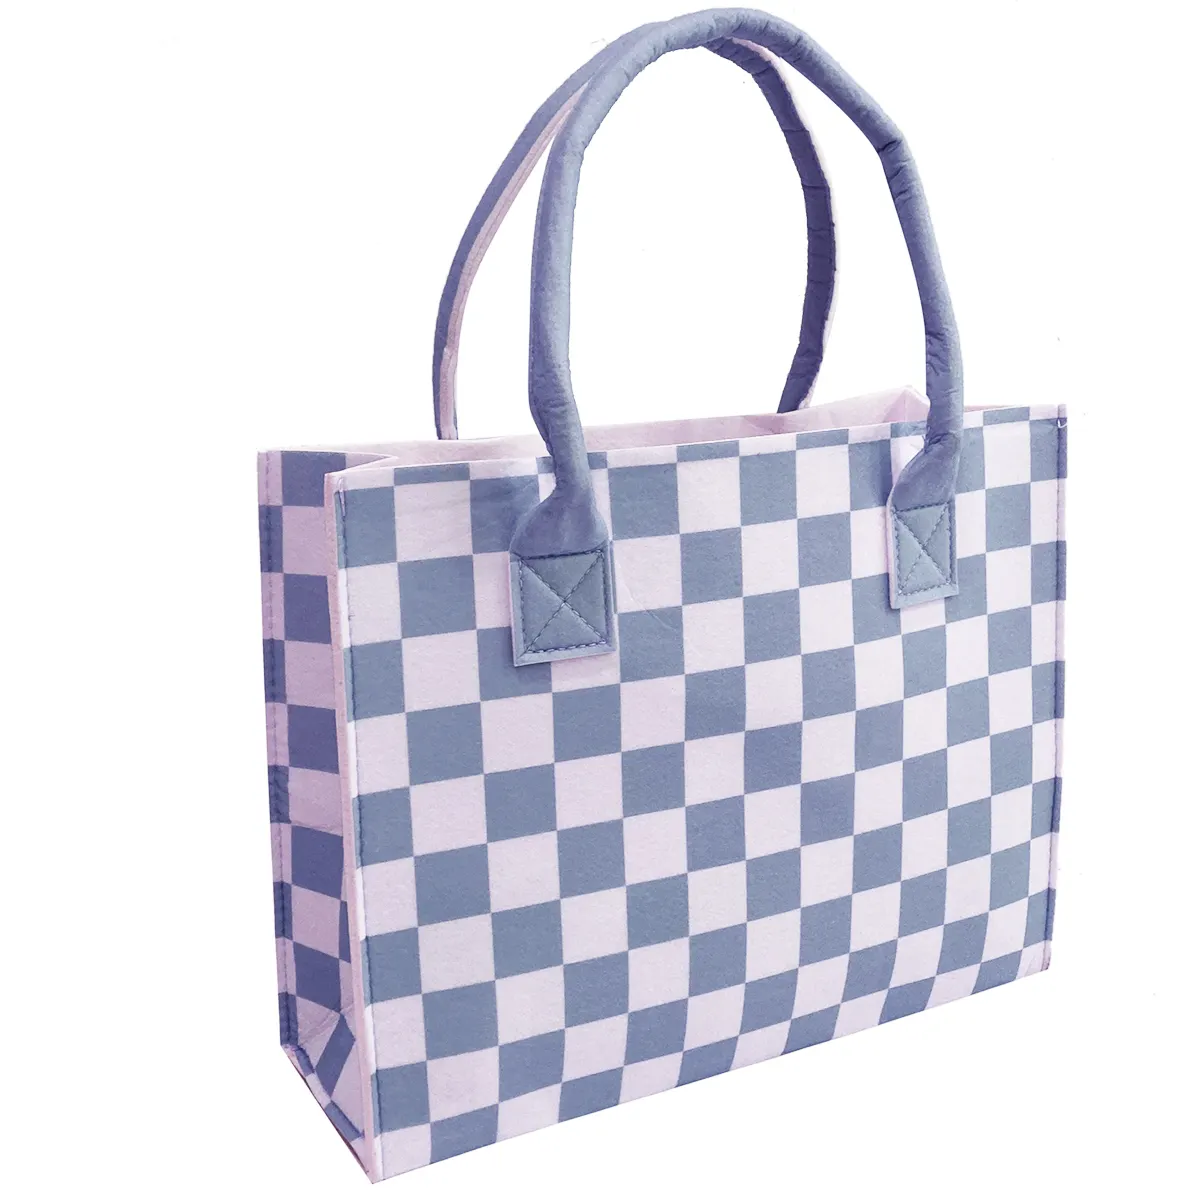 Peace Buy Service Low Price Light-weight Grocery Storage Carry Checkered Female Shopping Daypack Felt Tote Bag